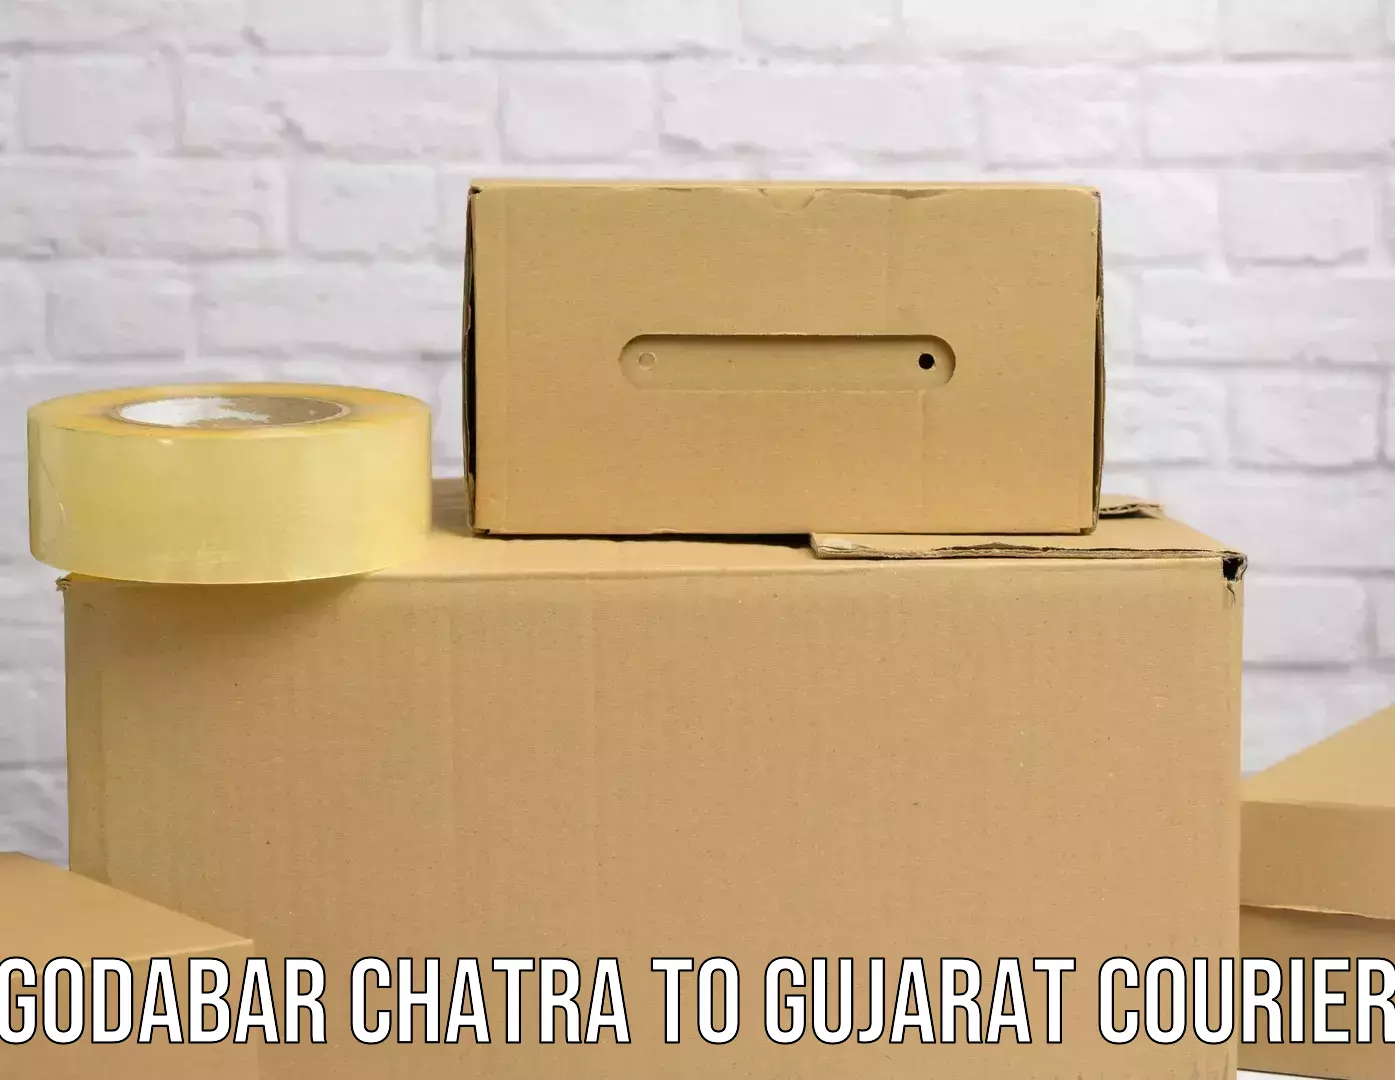 24-hour courier service in Godabar Chatra to Nadiad